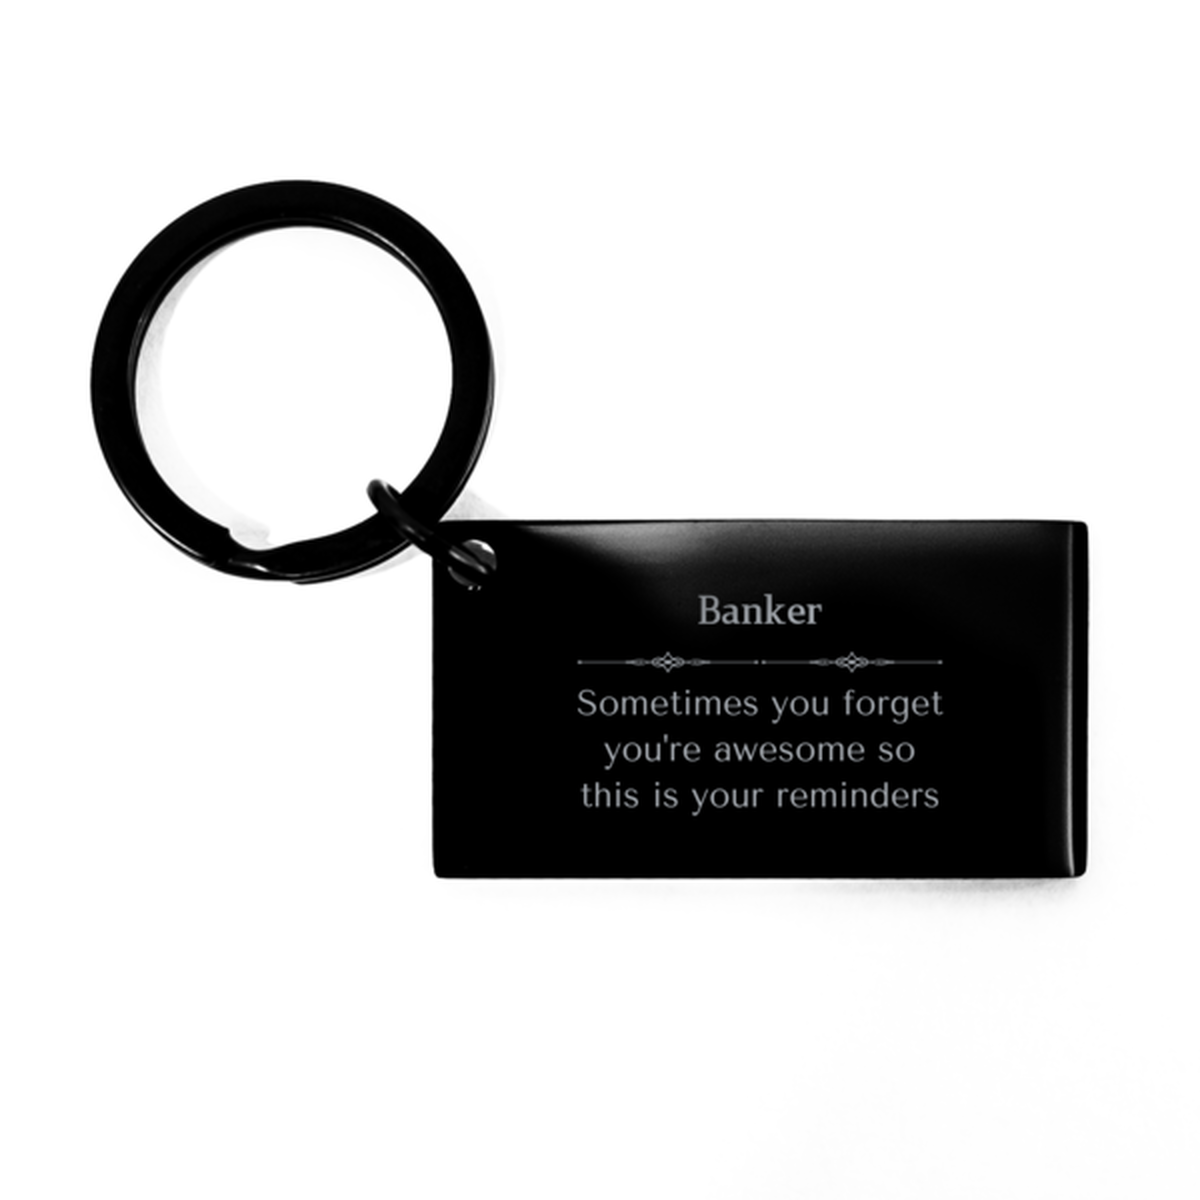 Sentimental Banker Keychain, Crane Operator Sometimes you forget you're awesome so this is your reminders, Graduation Christmas Birthday Gifts for Banker, Men, Women, Coworkers